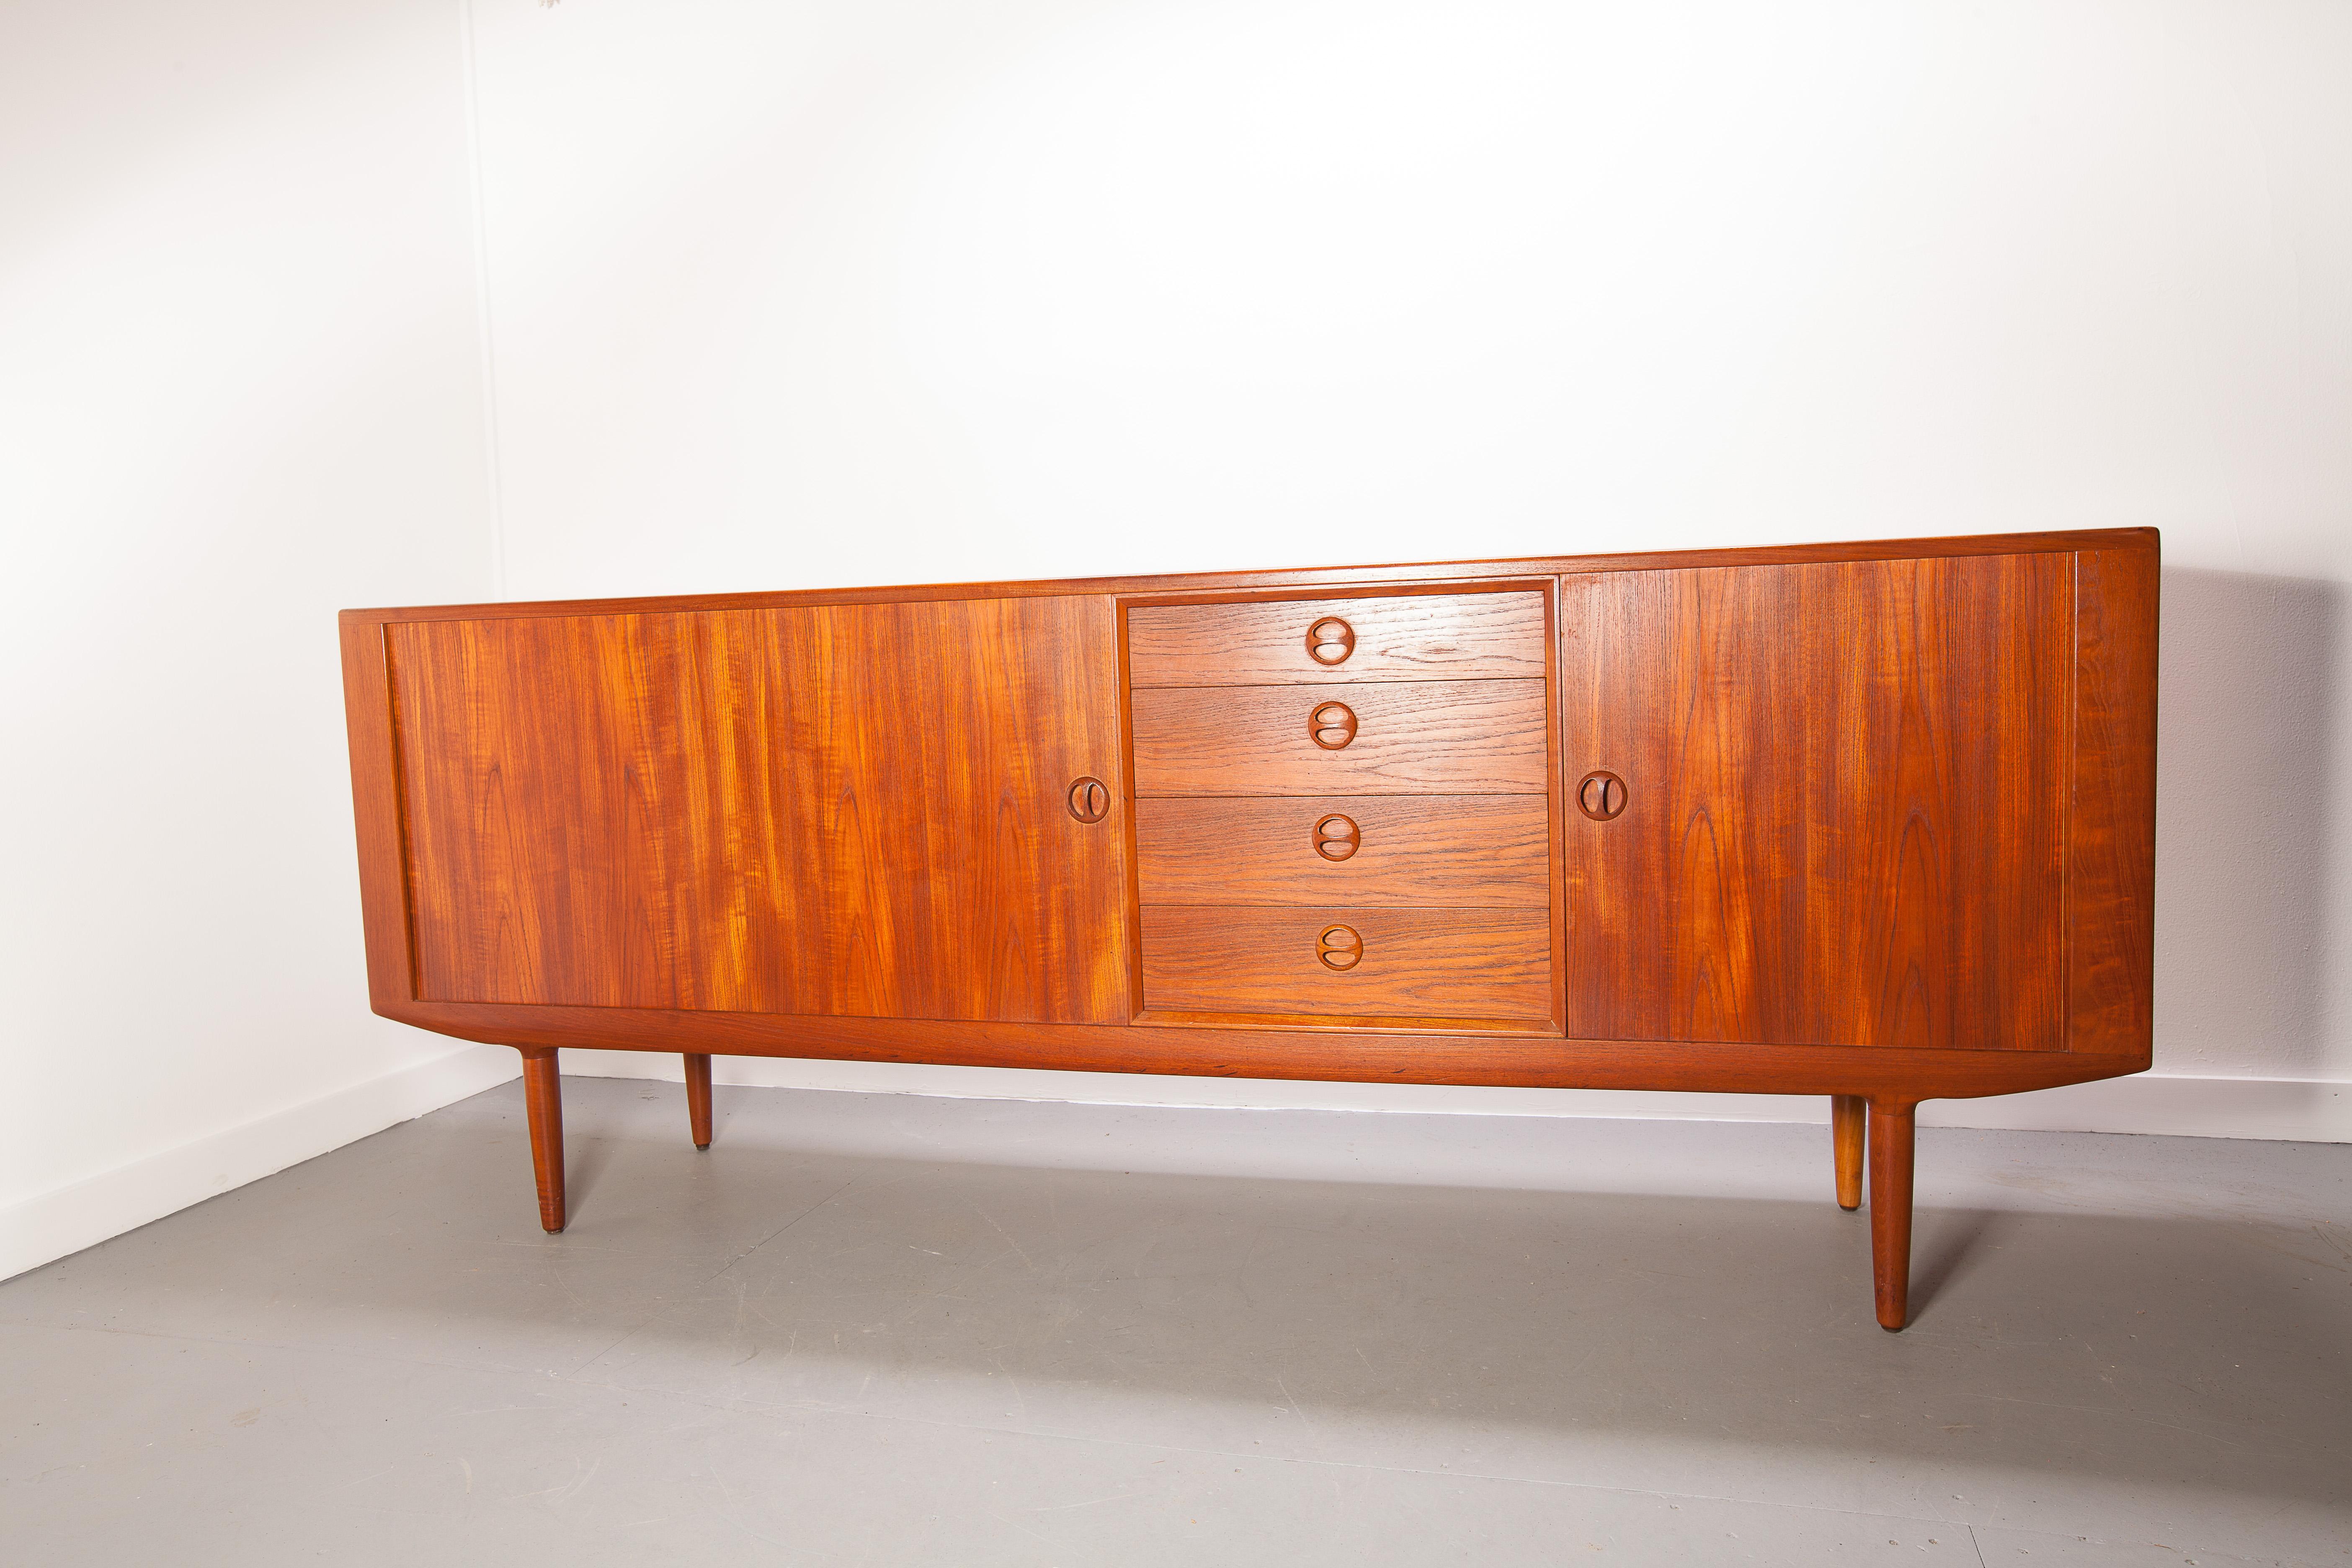 Hand-Crafted Classic Teak Credenza, , Designed by Kurt Ostervig, , Tambour Doors, Made in Denmark